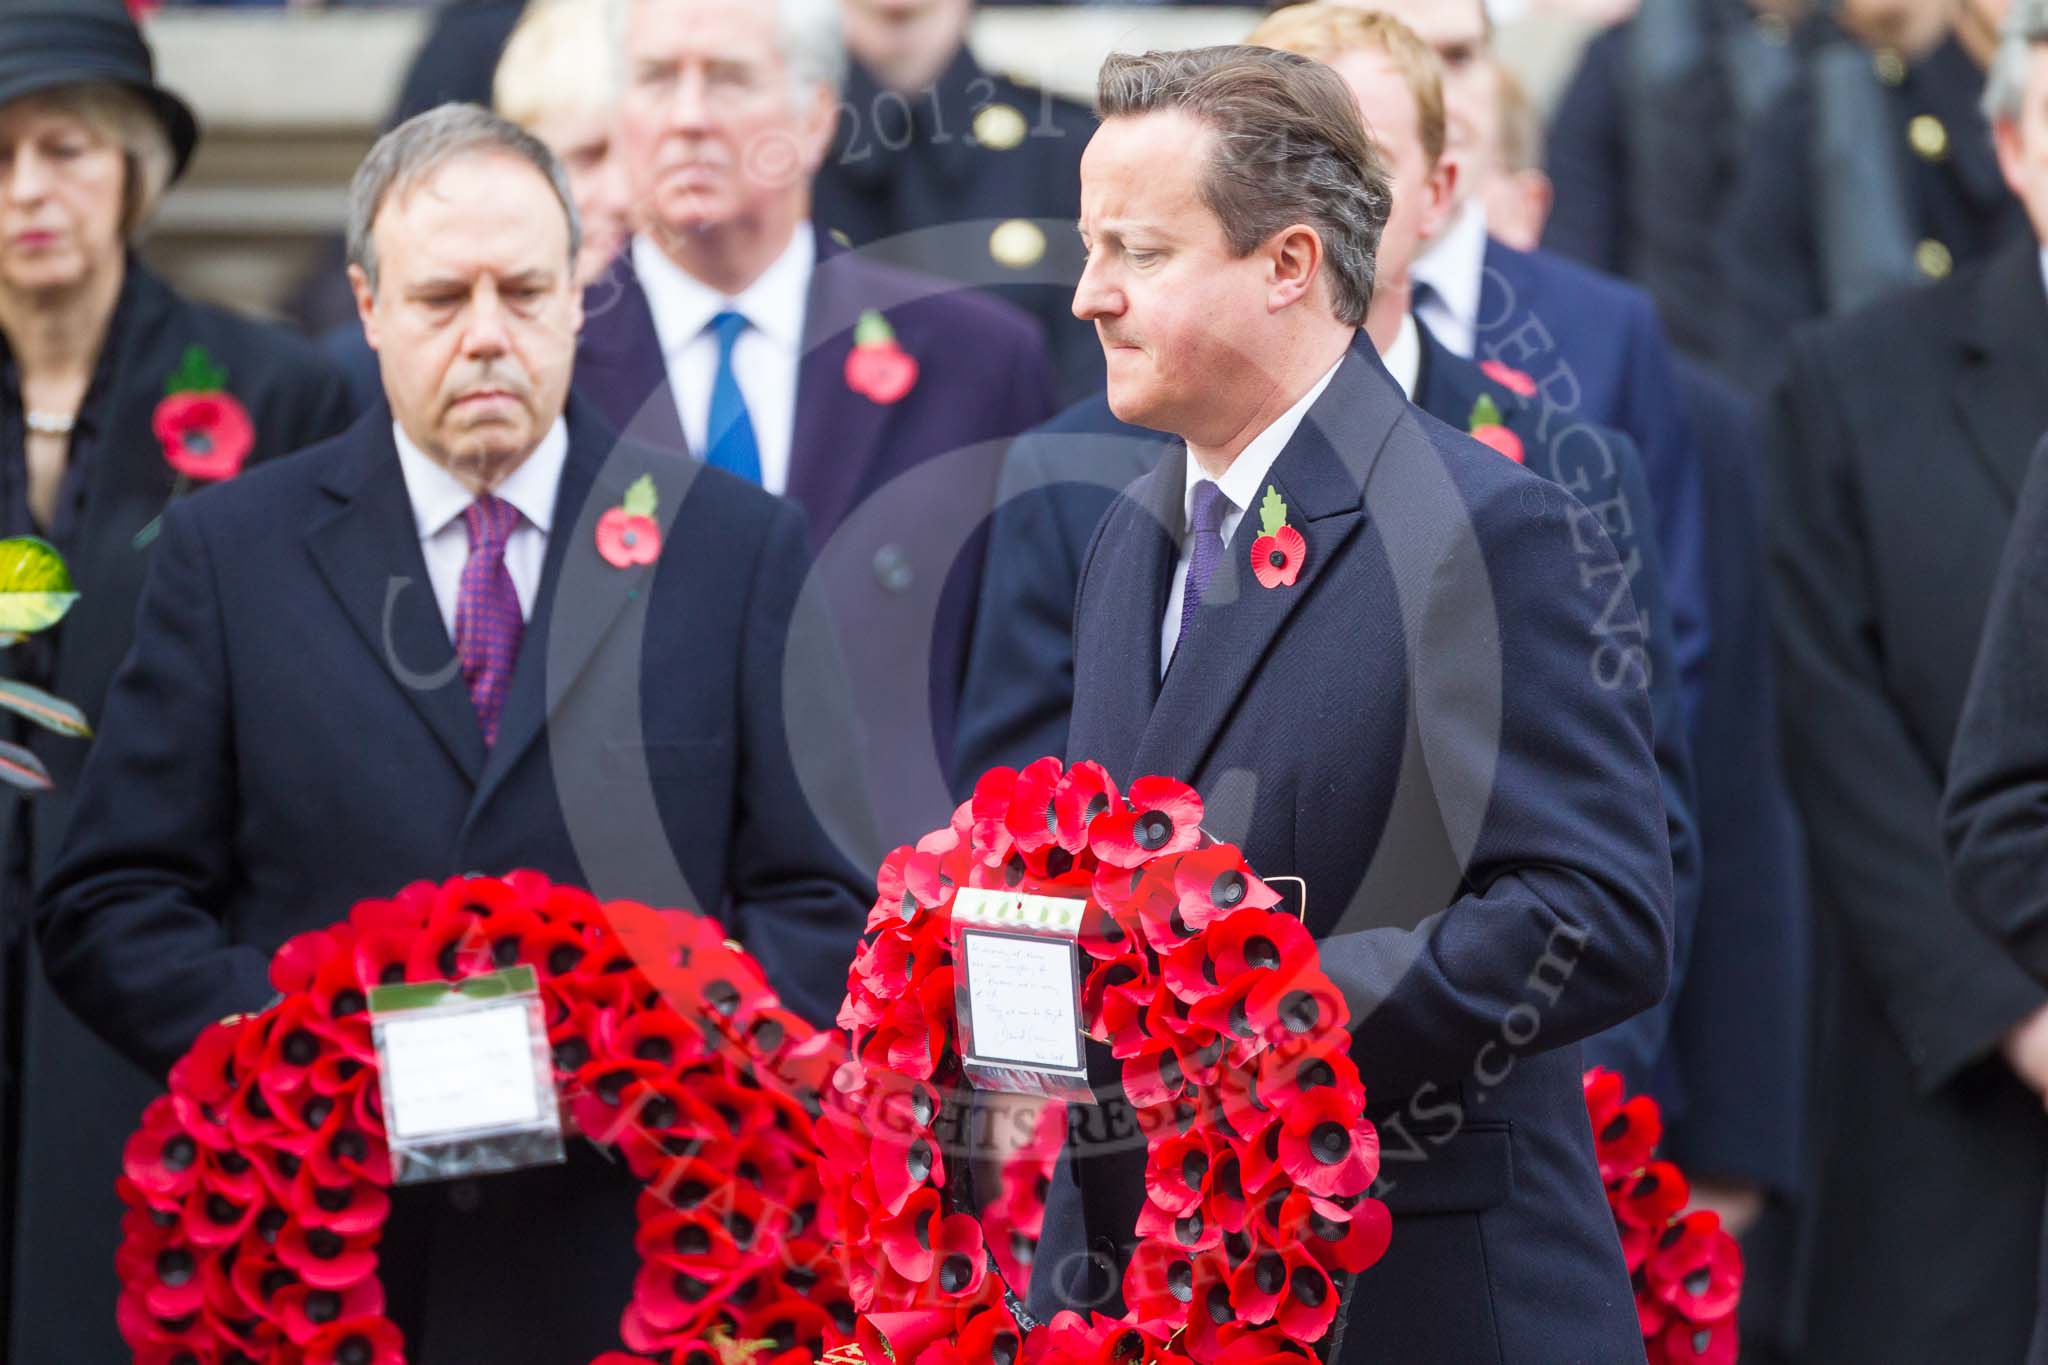 Remembrance Sunday at the Cenotaph 2015: The Prime Minister, David Cameron, walking with his wreath toward the Cenotaph. Image #202, 08 November 2015 11:06 Whitehall, London, UK